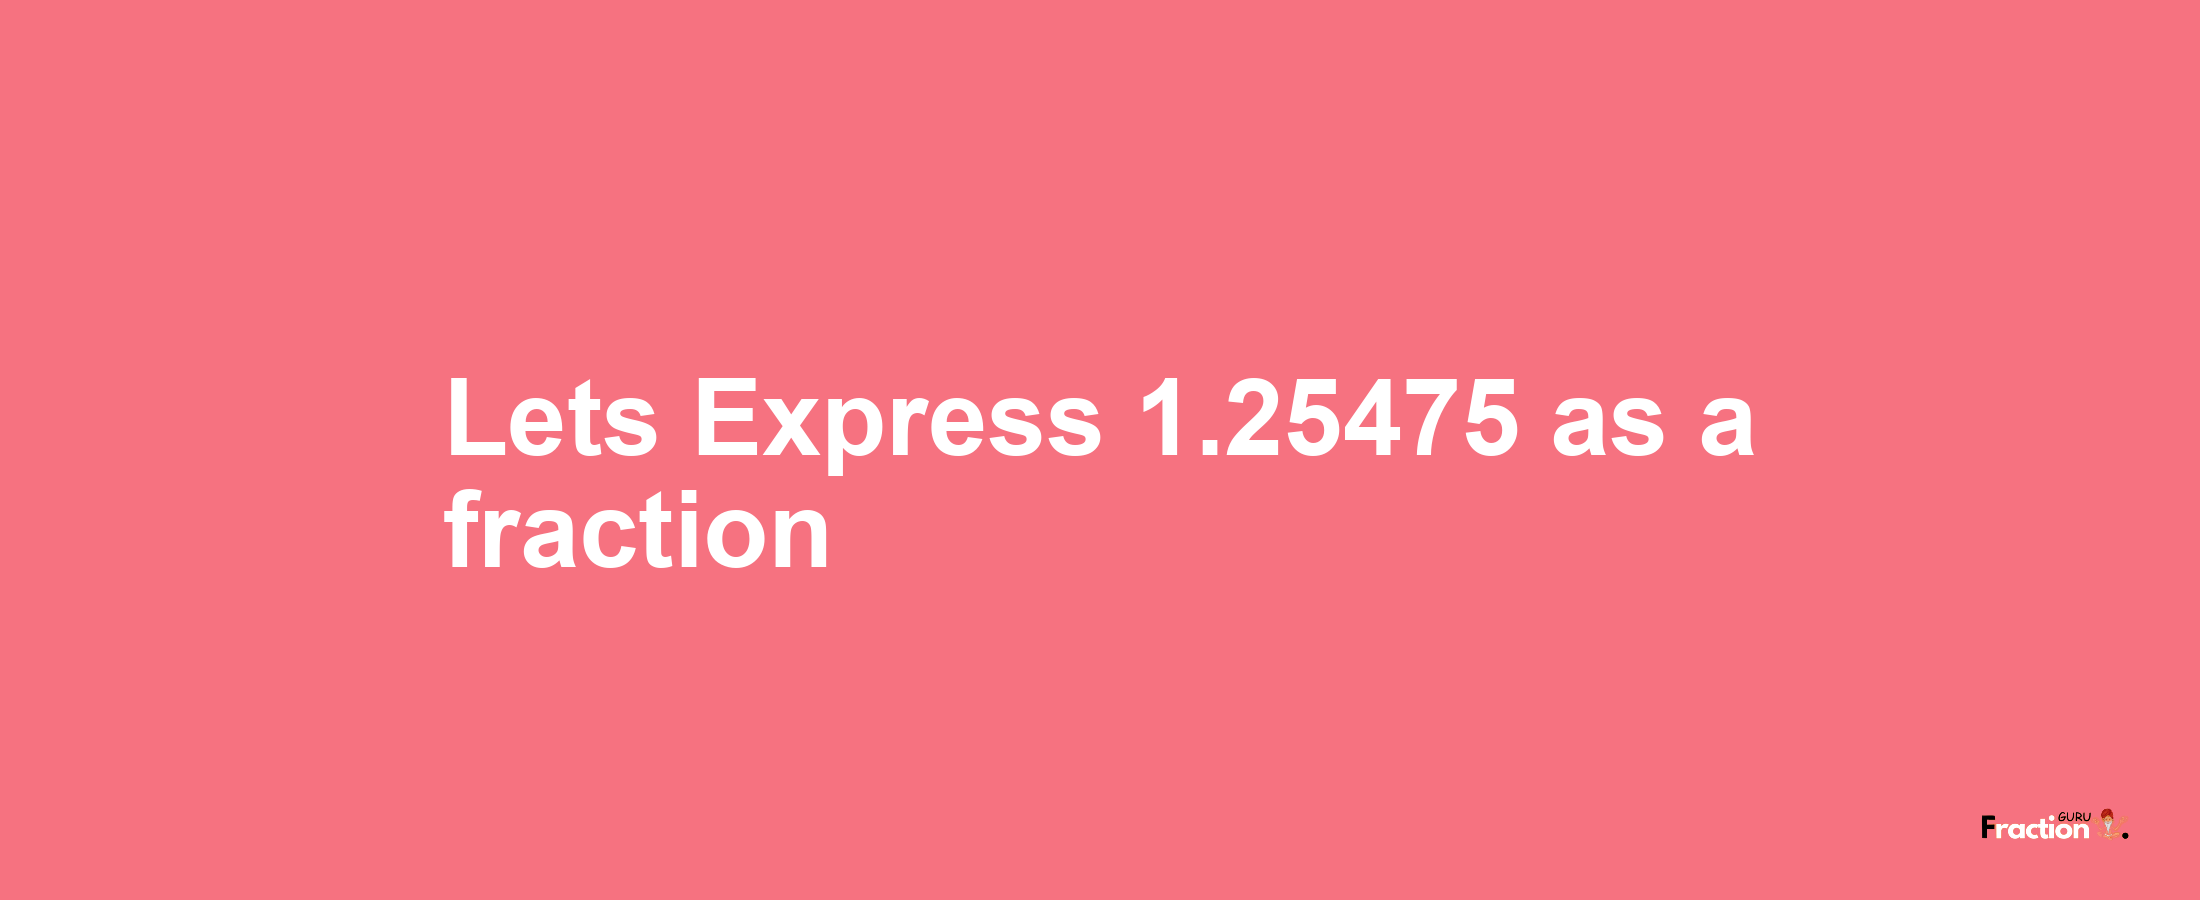 Lets Express 1.25475 as afraction